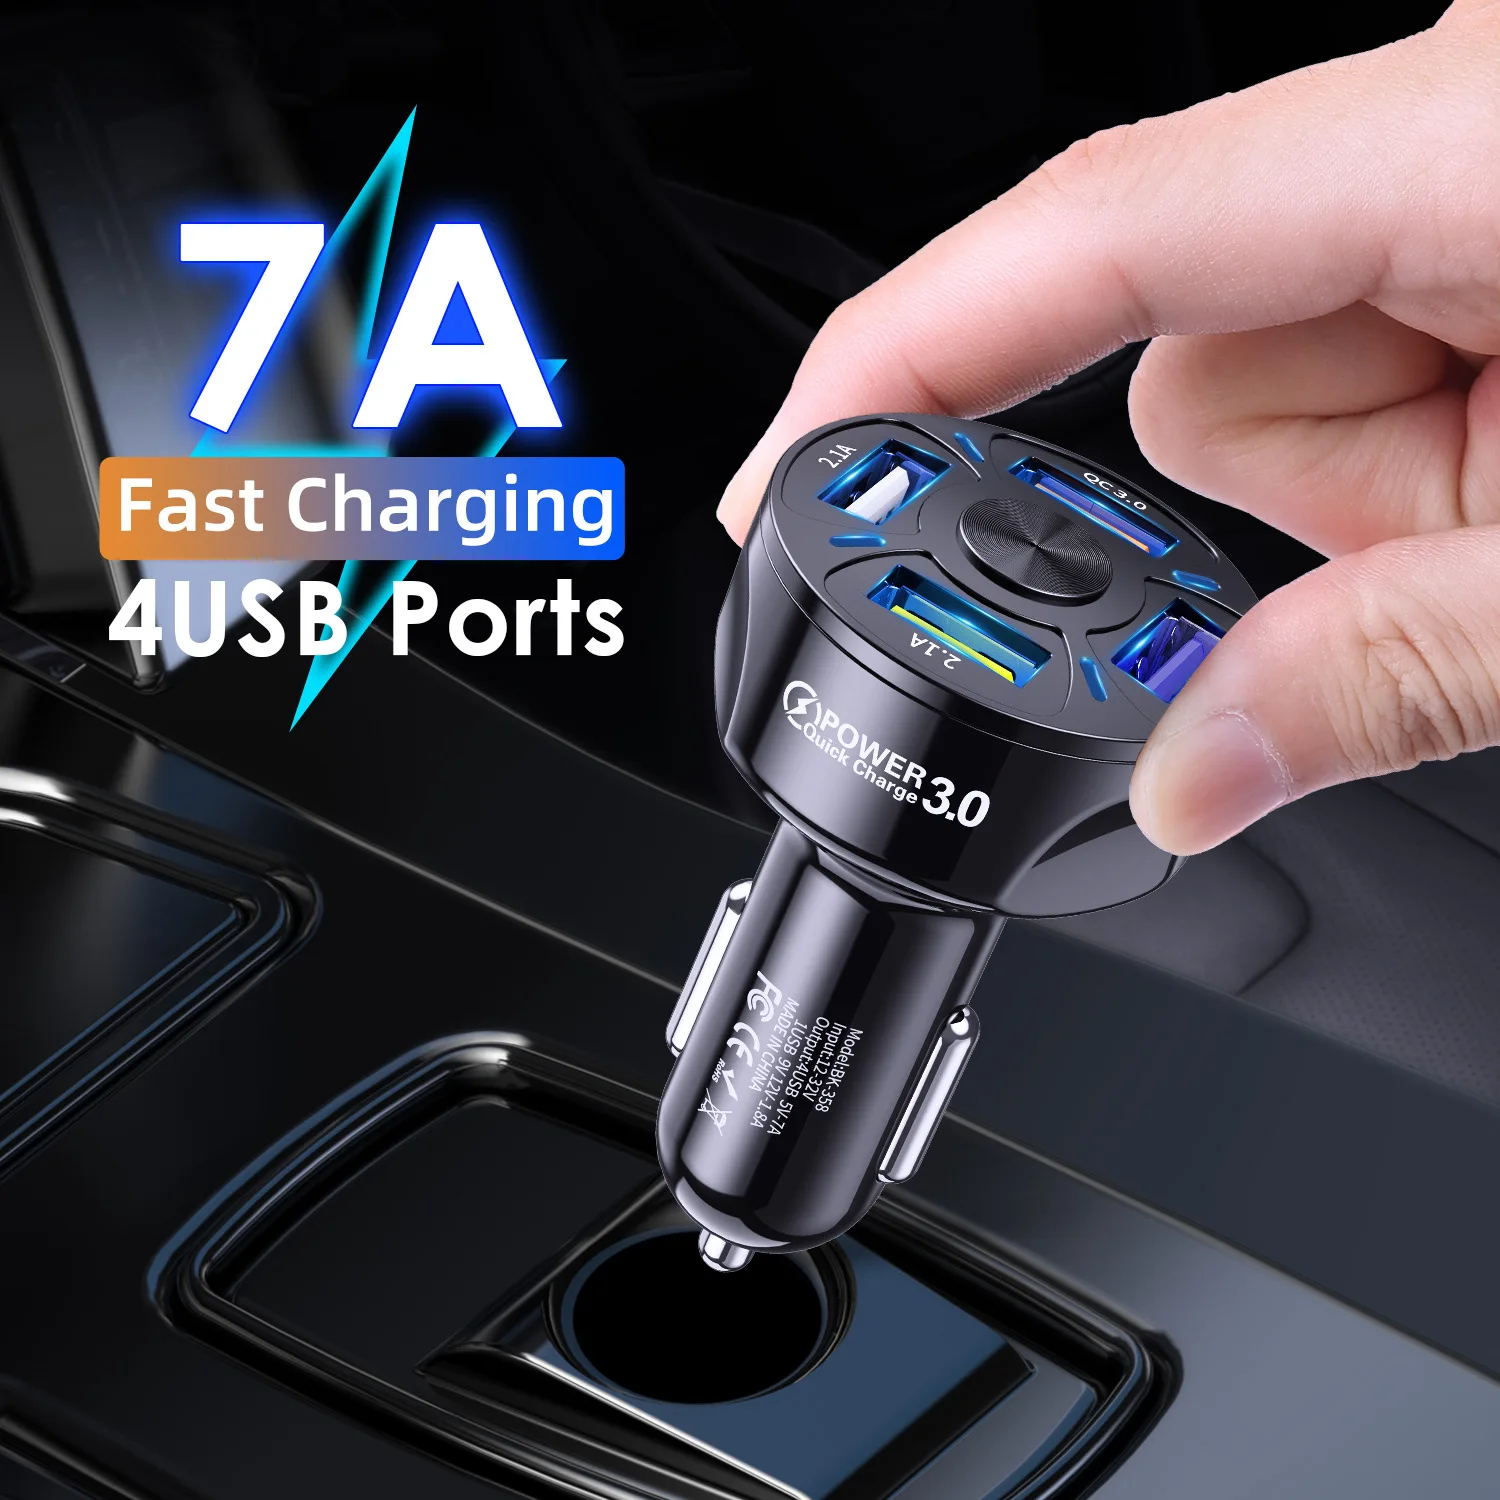 

4 Ports USB Car Charge 48W Quick 7A Mini Fast Charging for IPhone 11 Xiaomi Huawei Mobile Phone Charger Adapter In Car